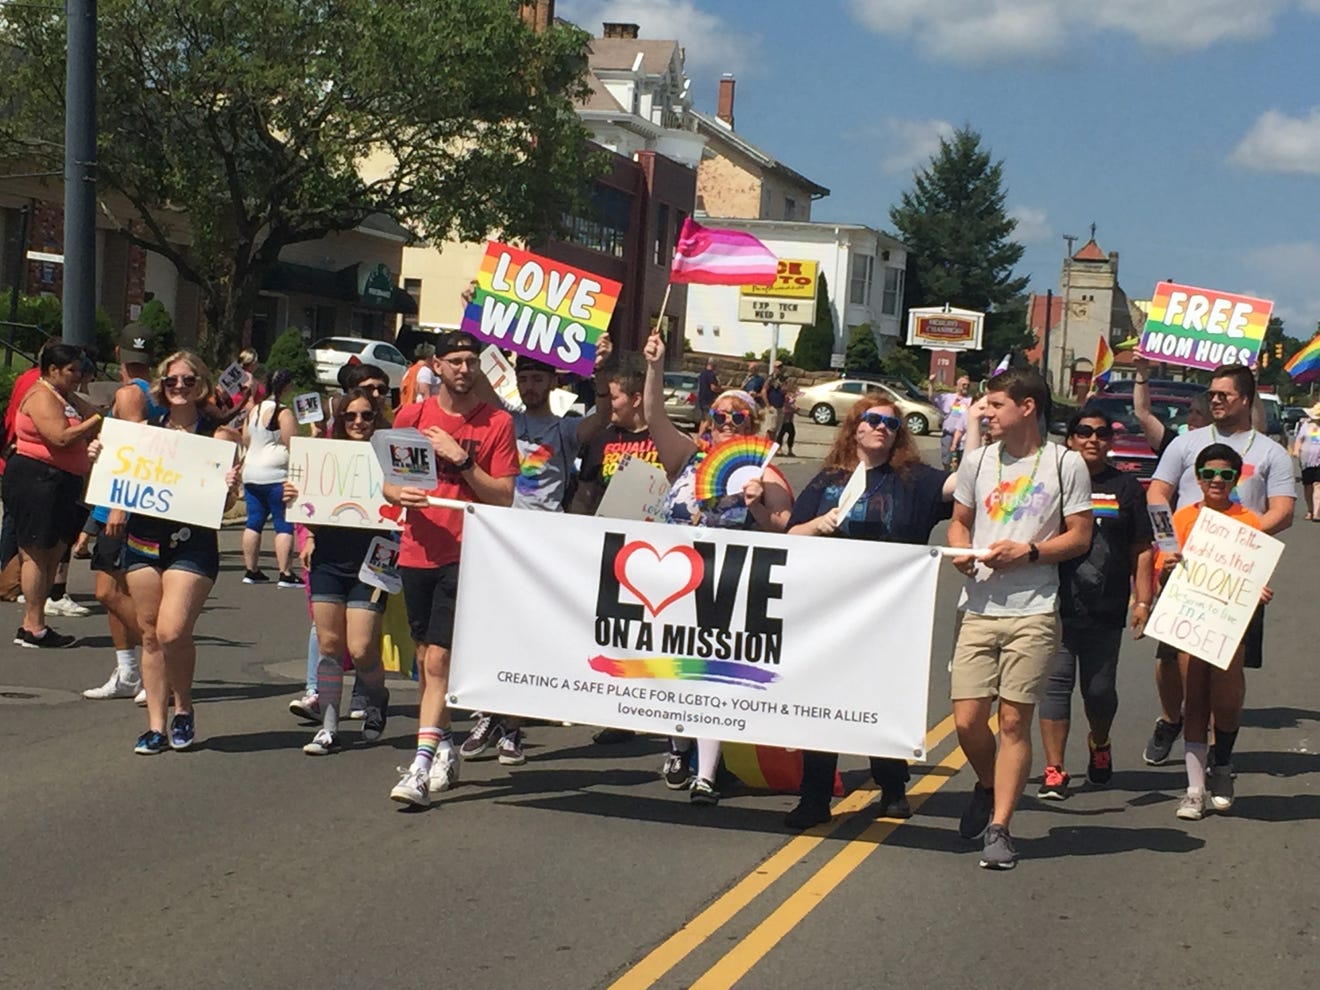 Mansfield Pride Festival and Parade returning after oneyear absence